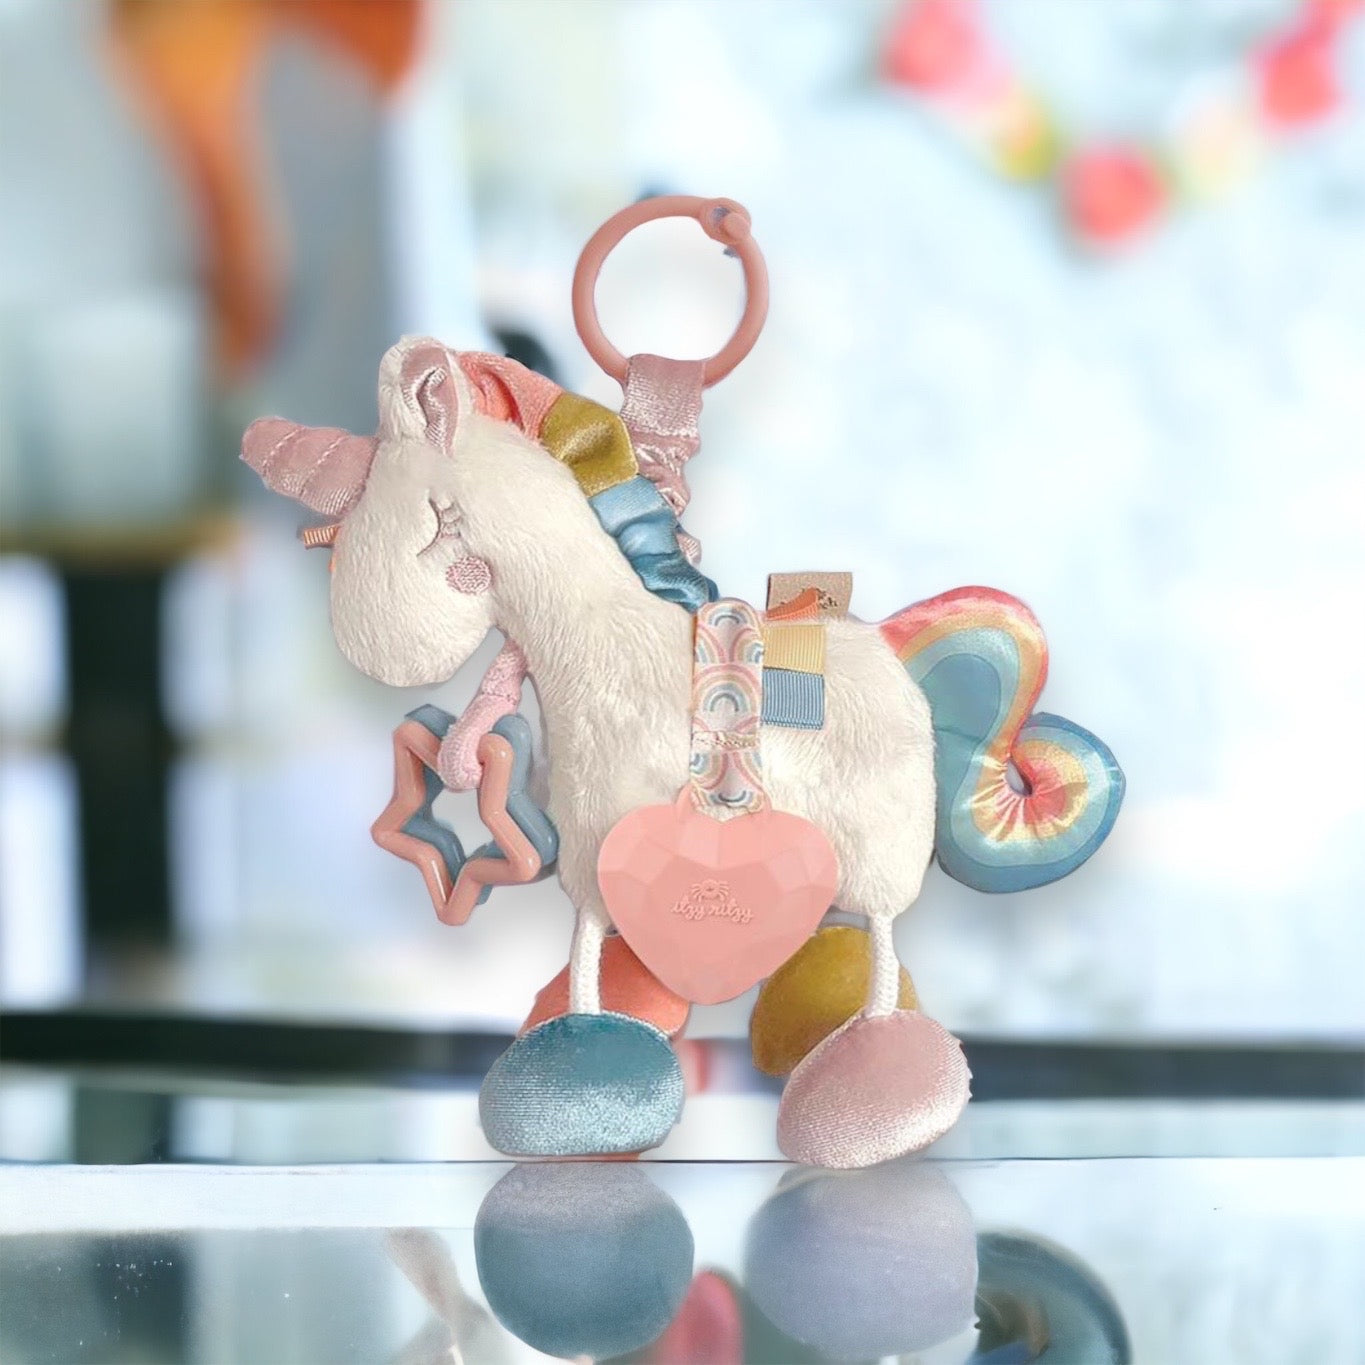 Link & Love Unicorn Activity Plush and Teether